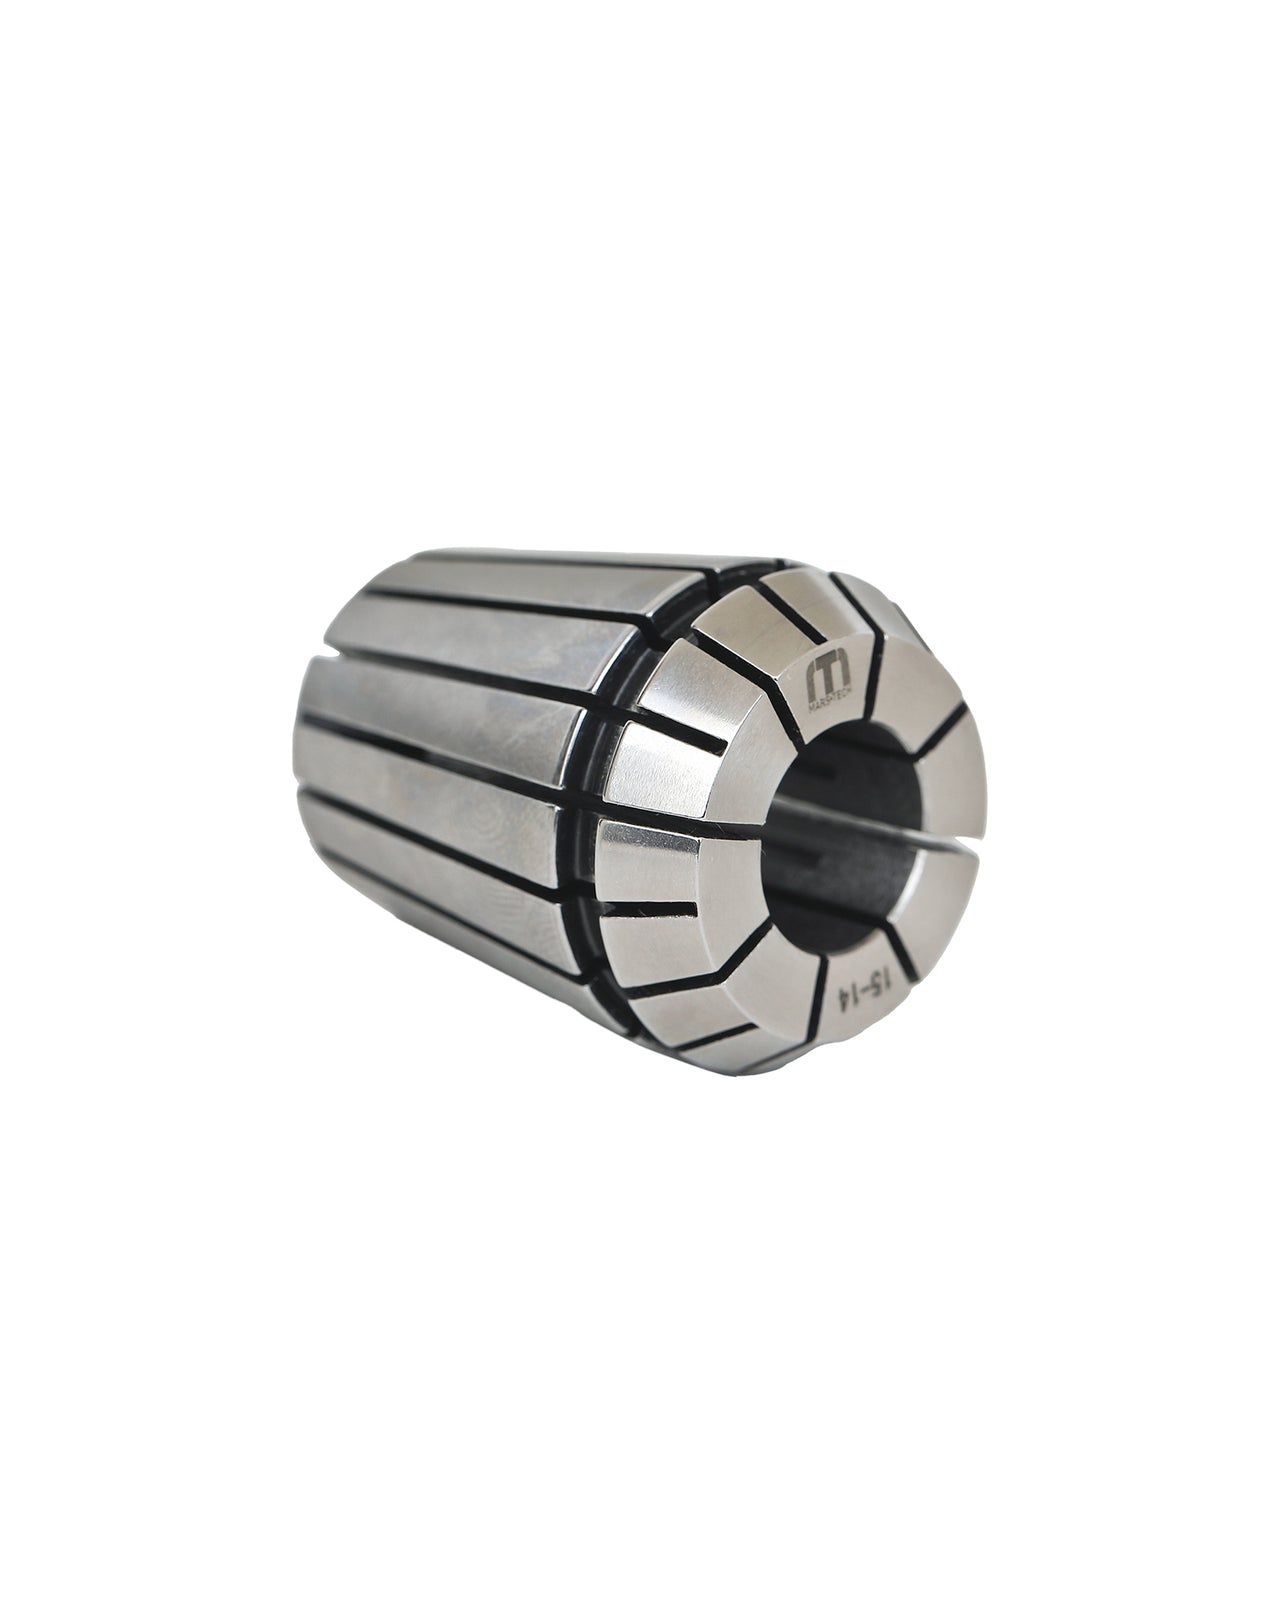 ER11 Collet Ultra high precision 0.005 AAA quality pack of 1